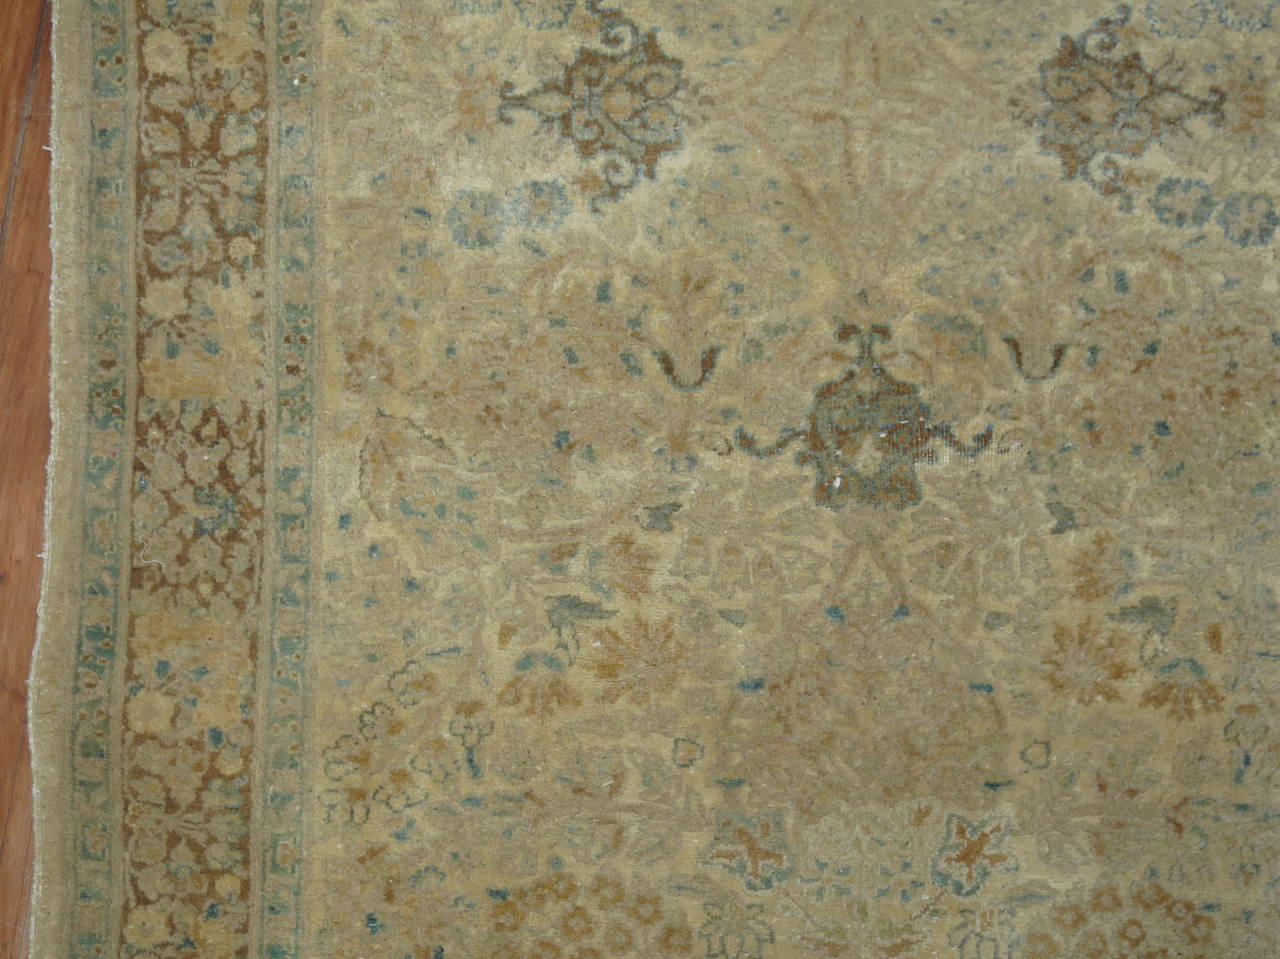 An elegant antique Persian Kirman (Kerman) runner with predominant khaki brown and celadon accents set on a shiny cream ground. Extremely Rare size to find from this time period and region.

2'10'' x 11'8''